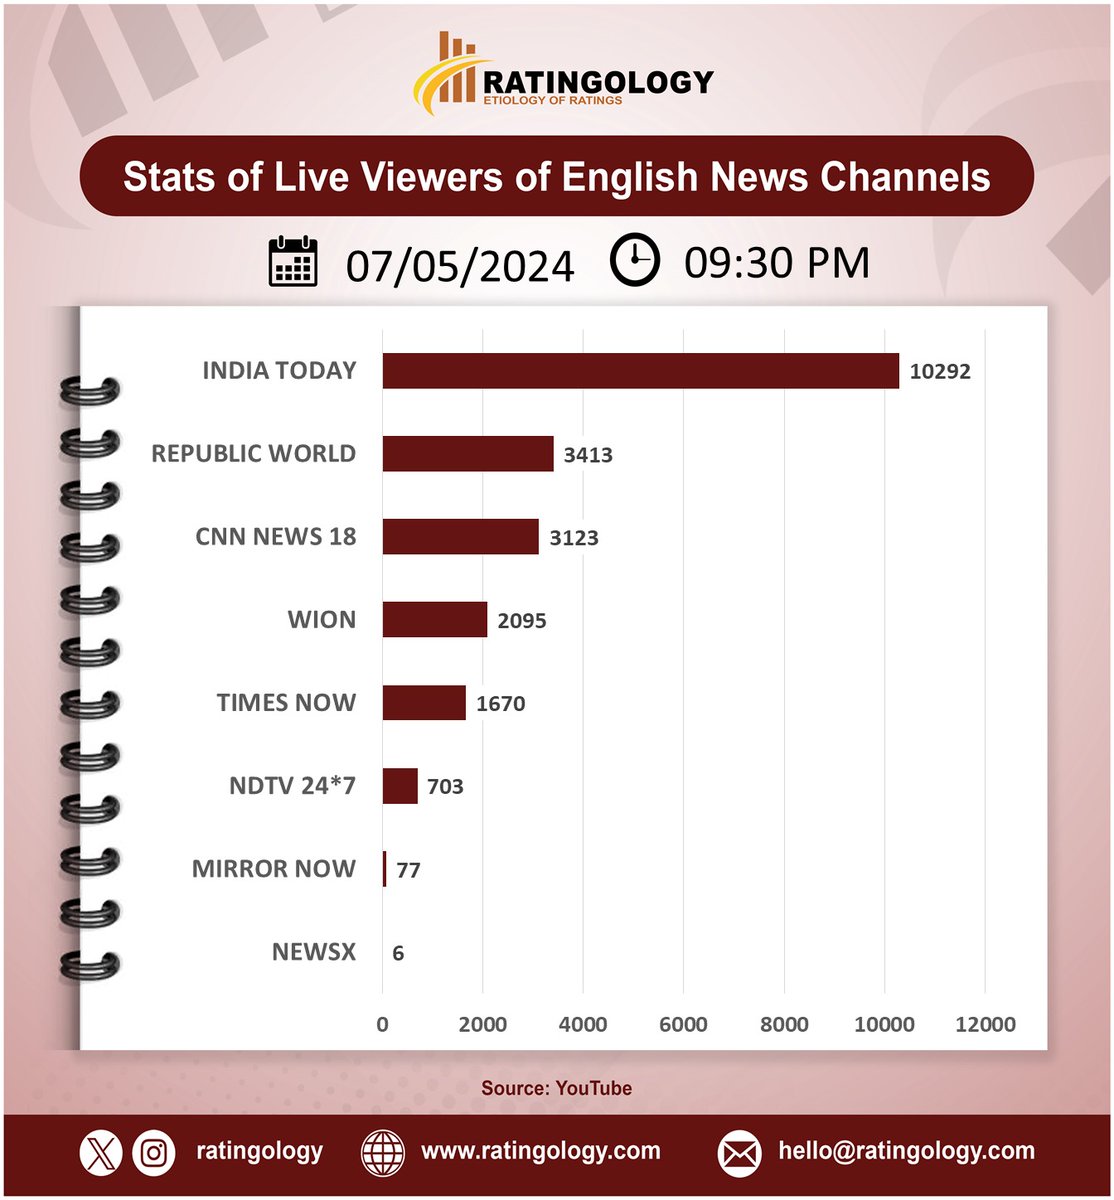 𝐒𝐭𝐚𝐭𝐬 𝐨𝐟 𝐥𝐢𝐯𝐞 𝐯𝐢𝐞𝐰𝐞𝐫𝐬 𝐨𝐧 #Youtube of #EnglishMedia #channelsat 09:30pm, Date: 07/May/2024 #Ratingology #Mediastats #RatingsKaBaap #DataScience #IndiaToday #Wion #RepublicTV #CNNNews18 #TimesNow #NewsX #NDTV24x7 #MirrorNow